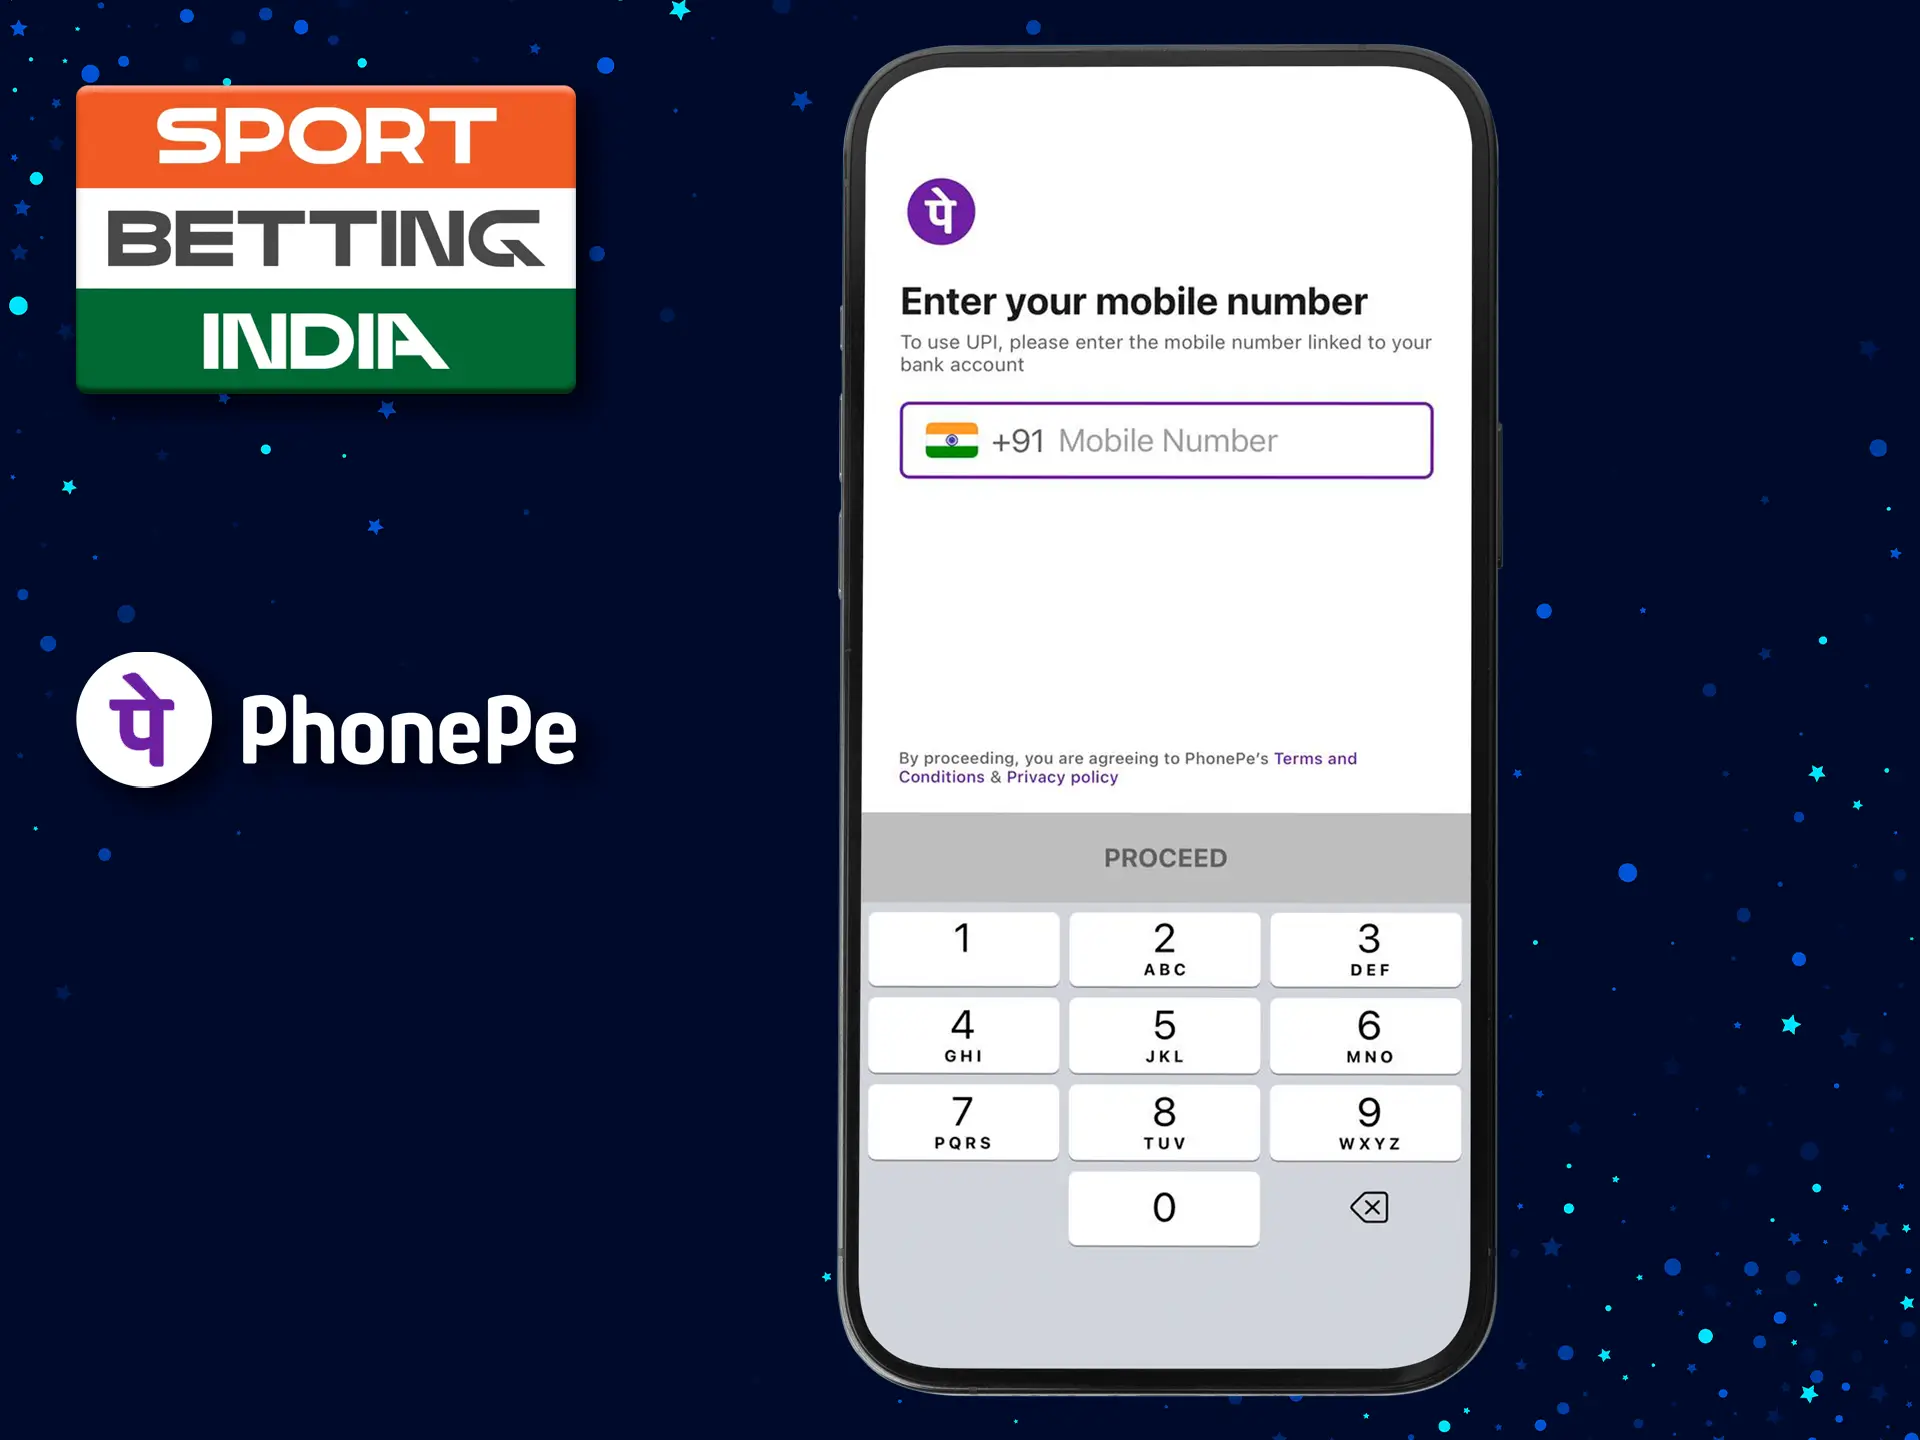 Use your mobile phone number to register for the PhonePe app.